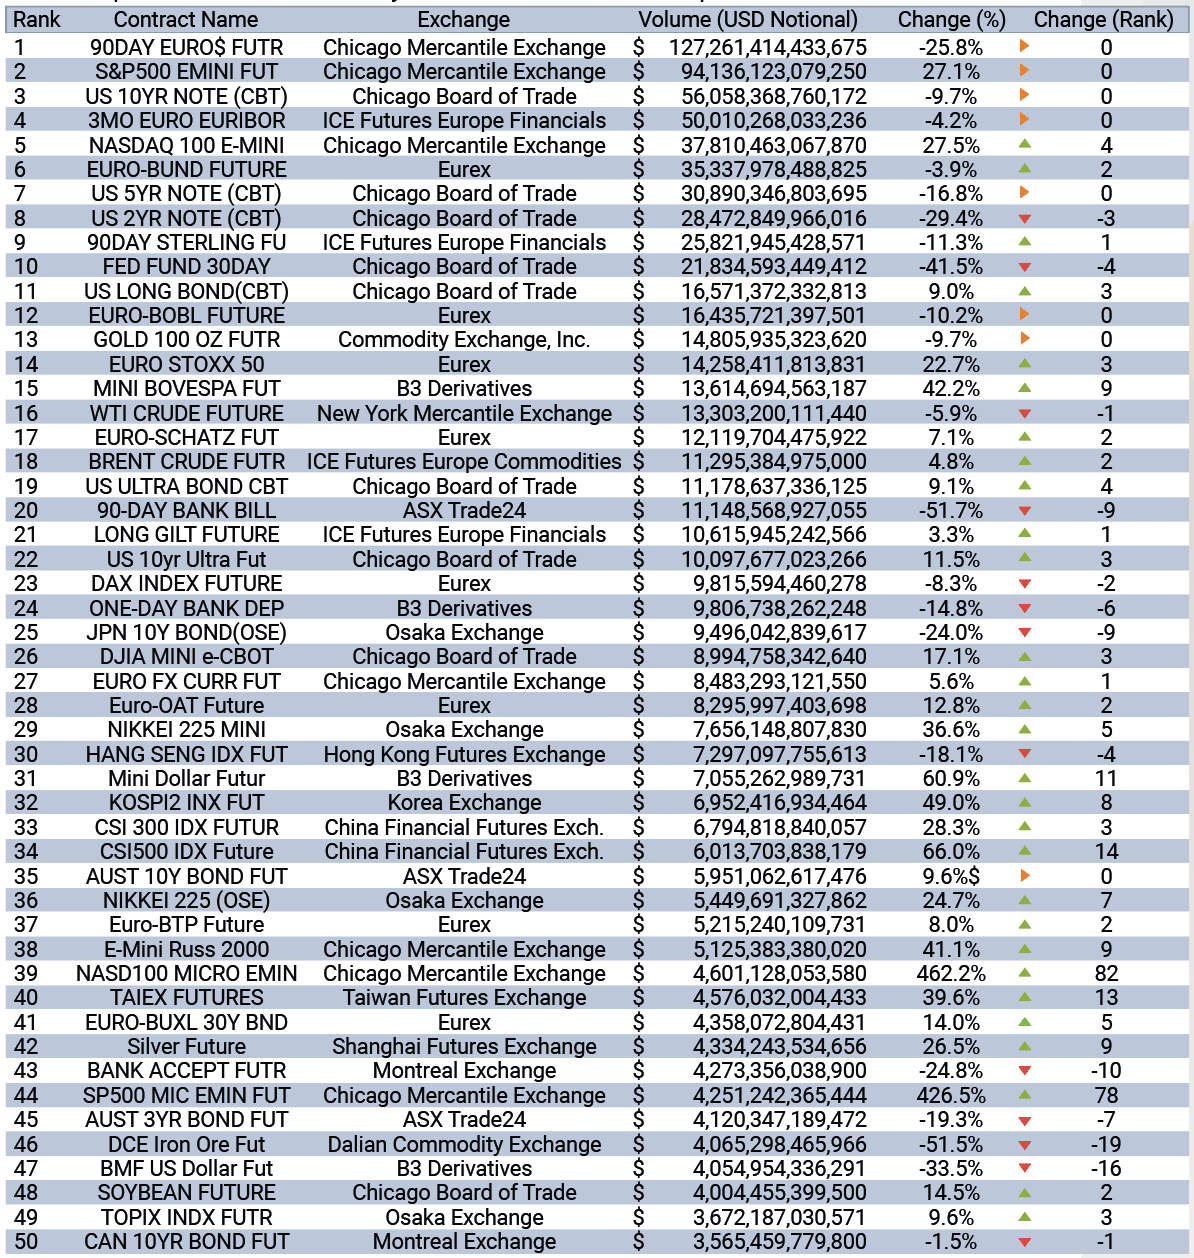 Global top 50 futures contracts by traded notional in USD equivalent